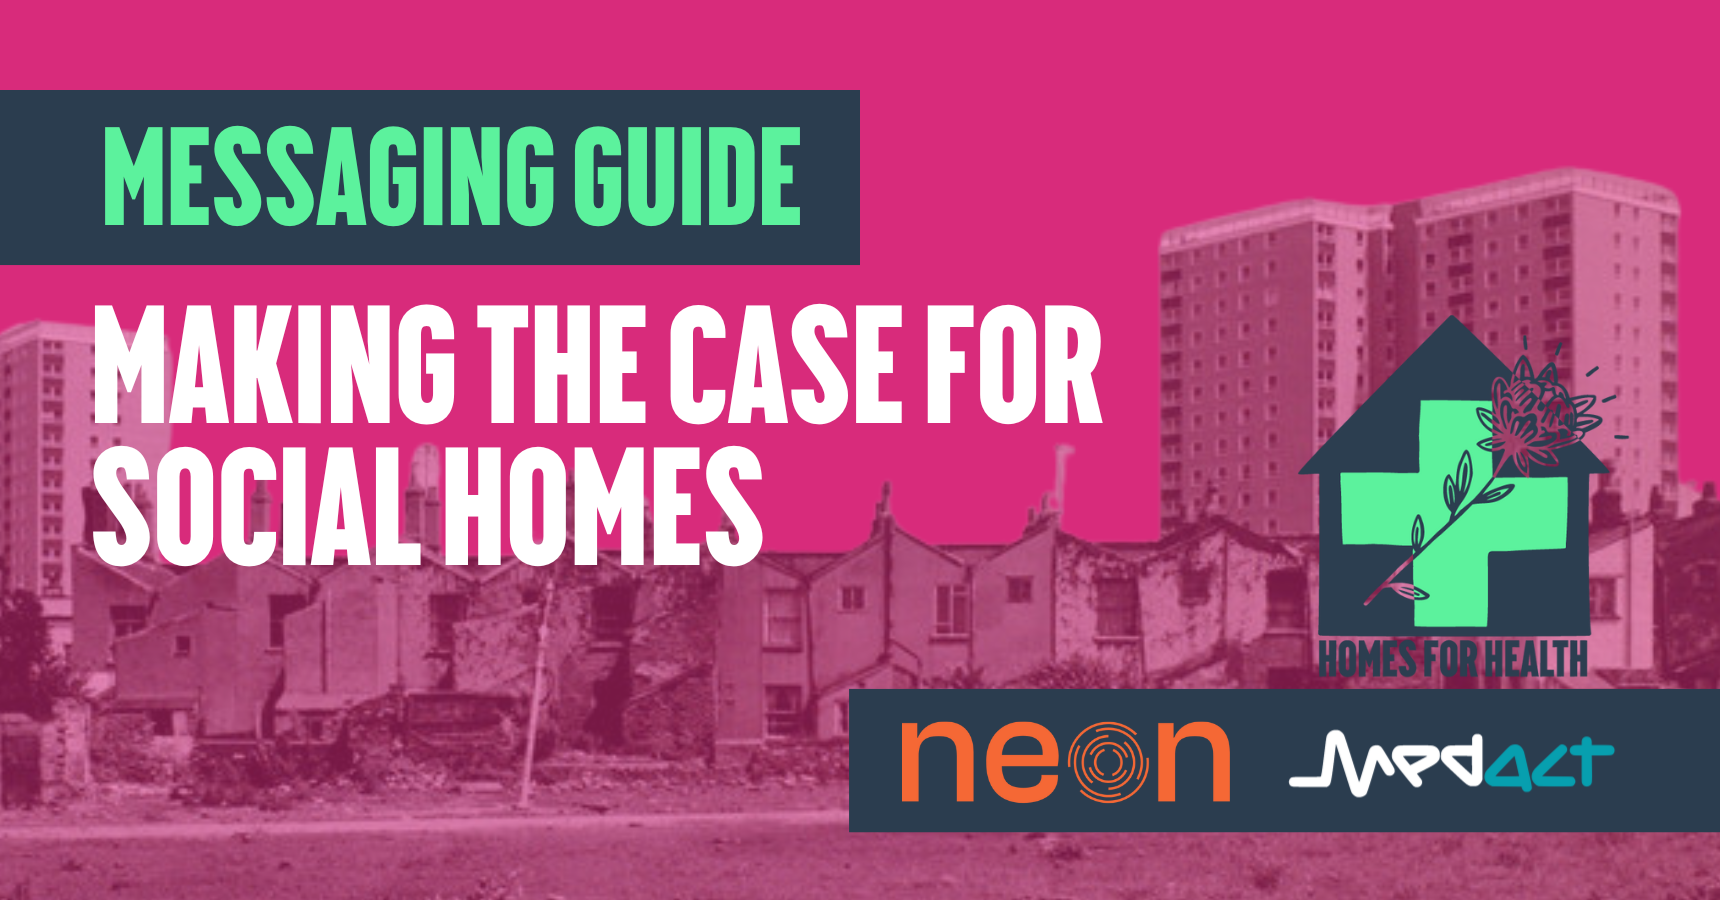 Messaging Guide: Making the Case for Social Homes - Medact, Homes for Health, NEON